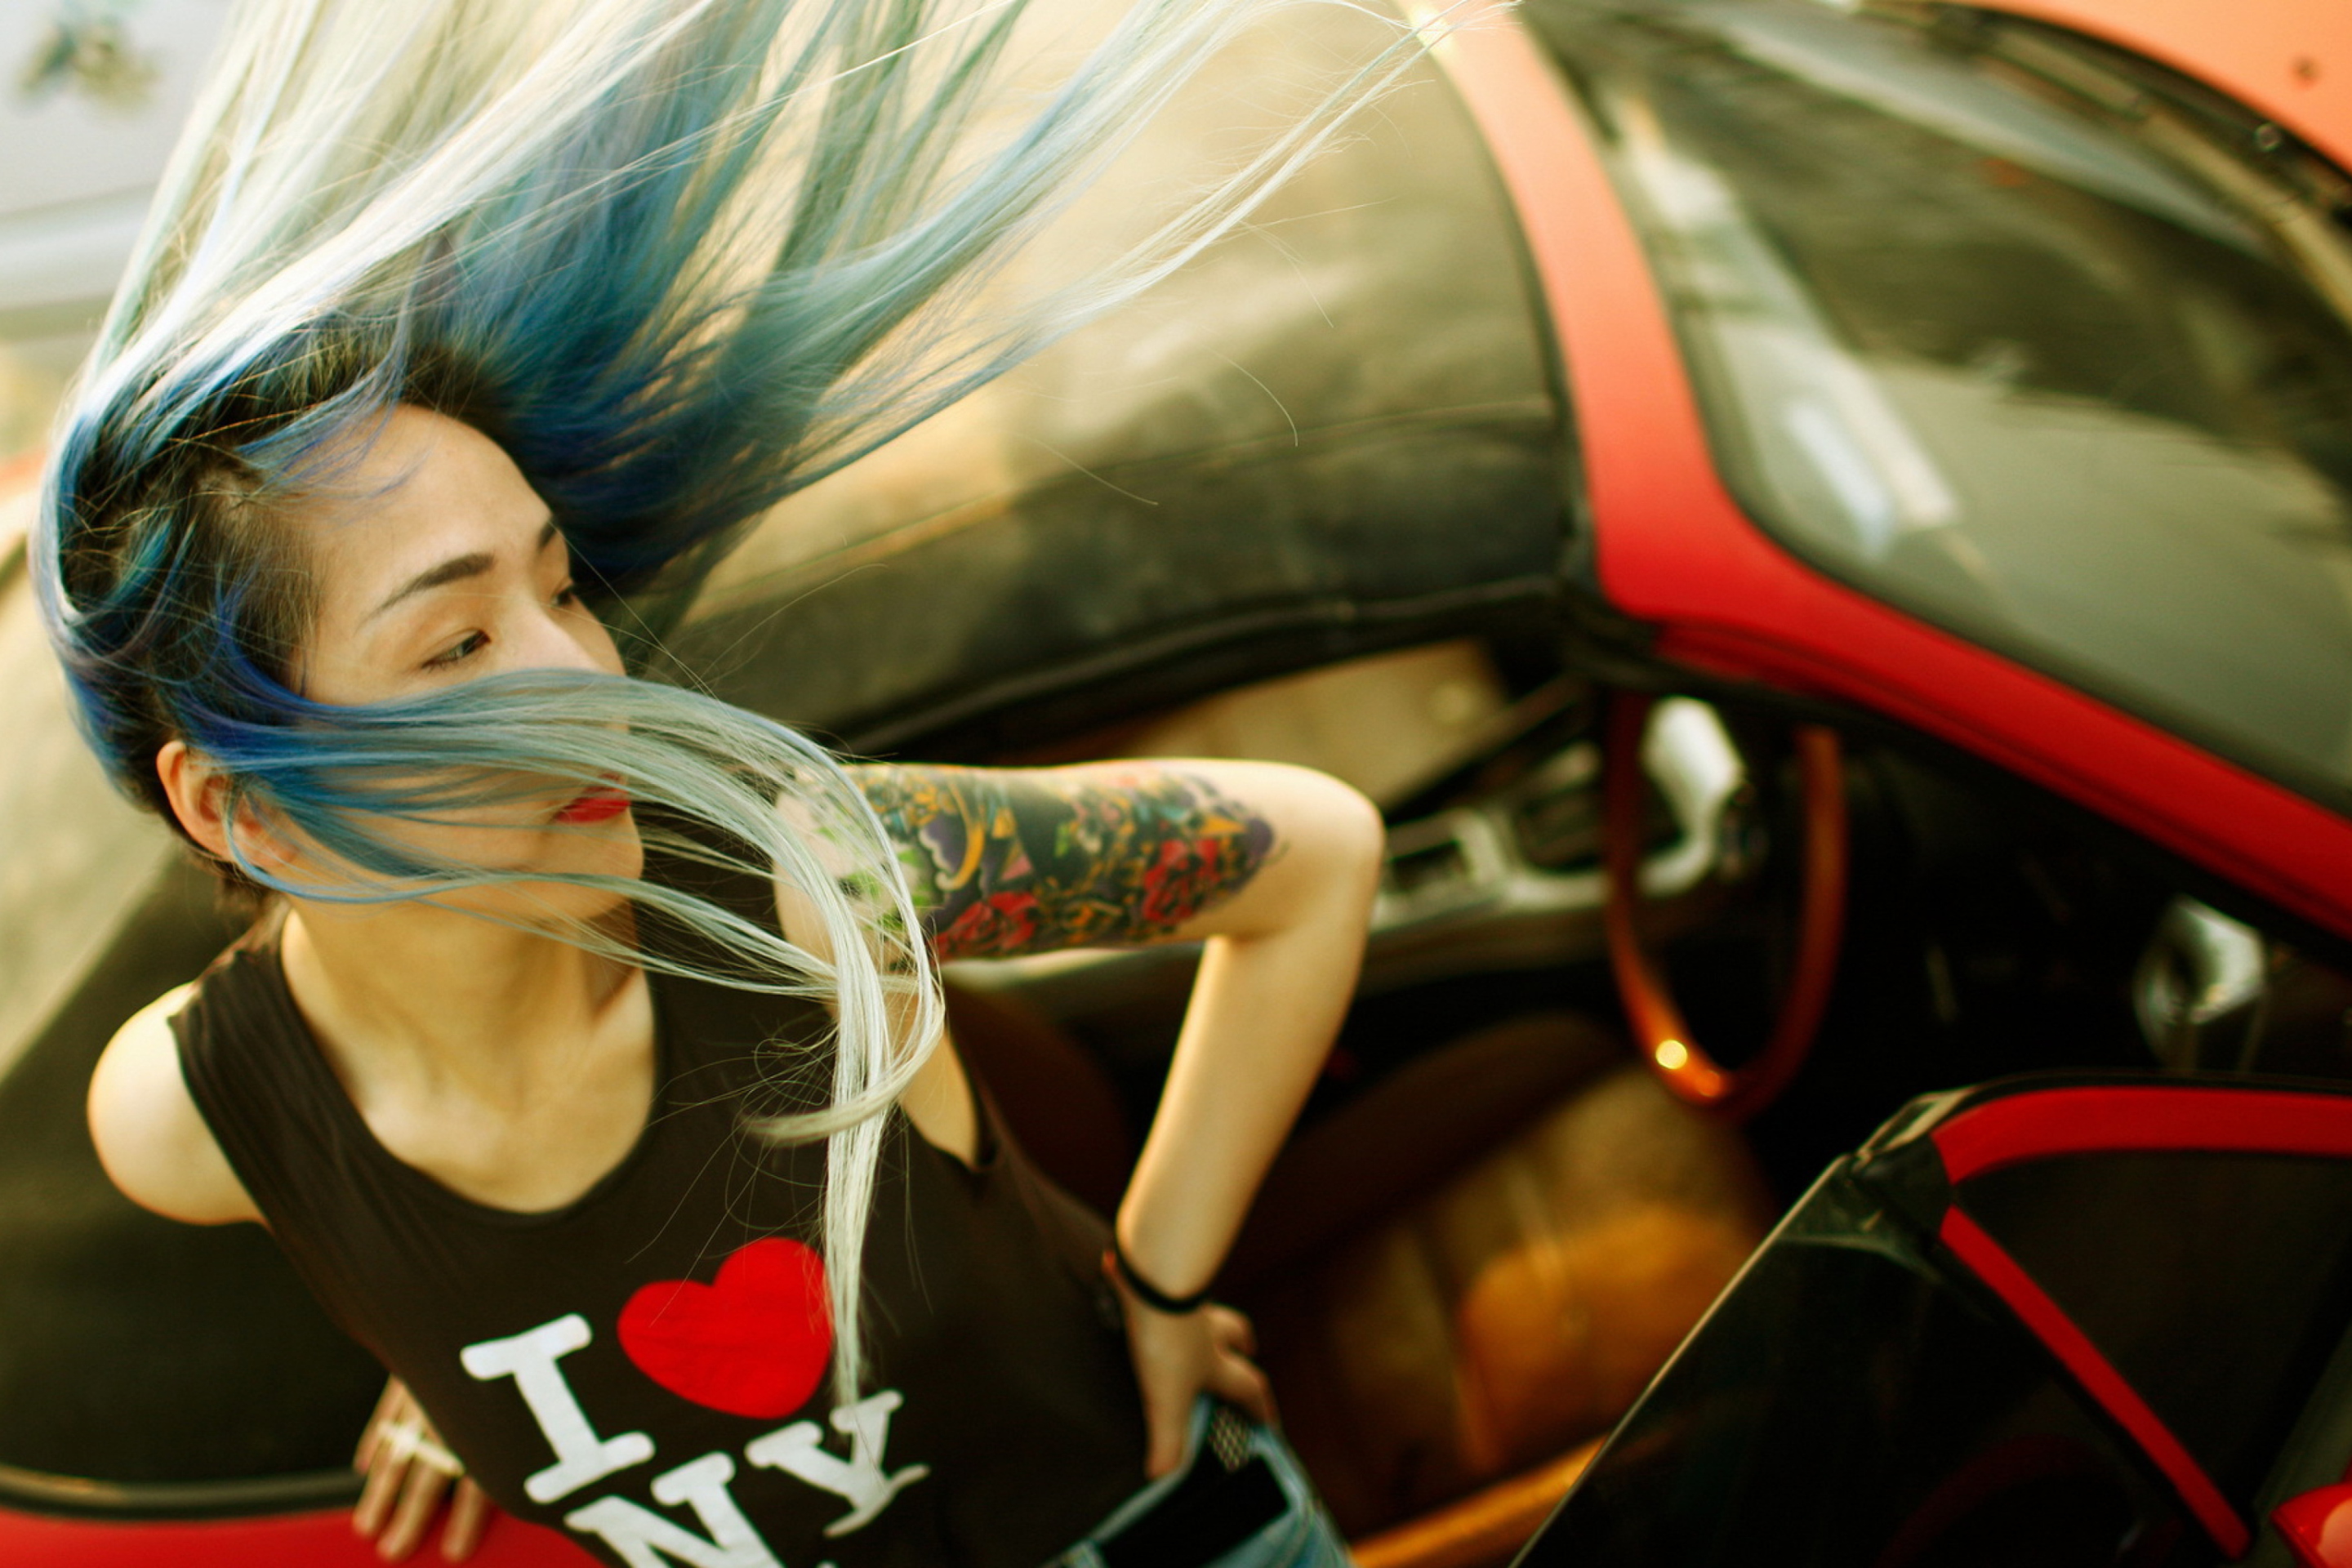 Cool Asian Girl With Blue Hair & I Love NY T-shirt wallpaper 2880x1920